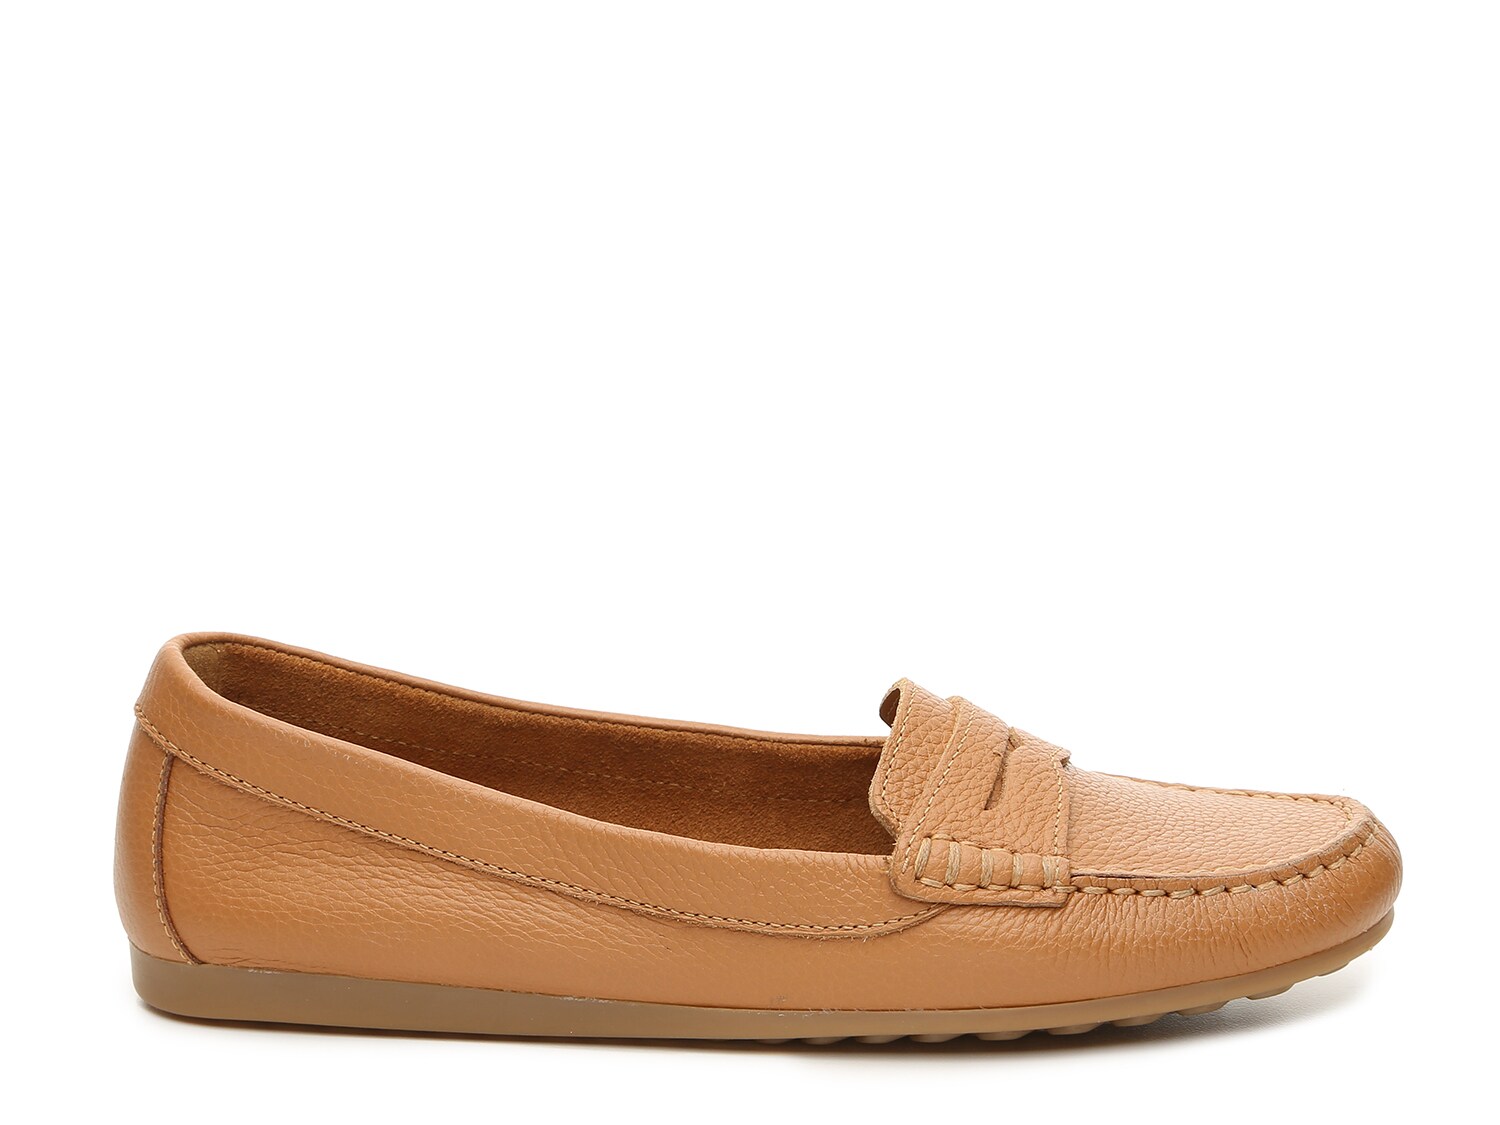 Coach and Four Nerys Penny Loafer Women's Shoes DSW